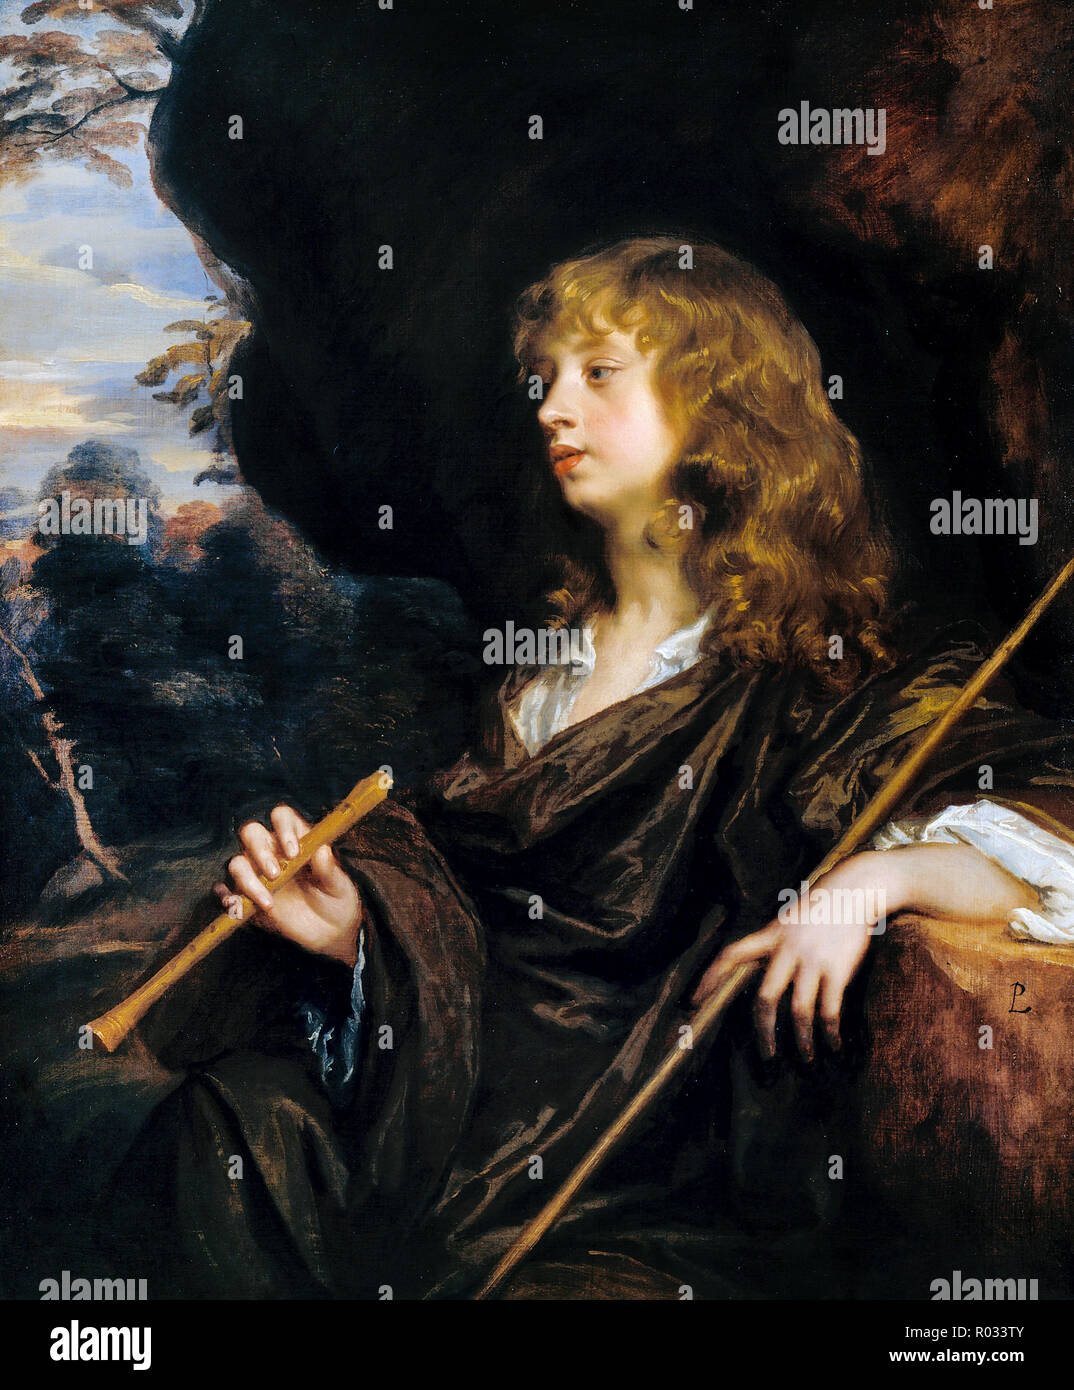 Peter Lely, A Boy as a Shepherd, Circa 1658-1660 Oil on canvas, Dulwich Picture Gallery, London, England. Stock Photo